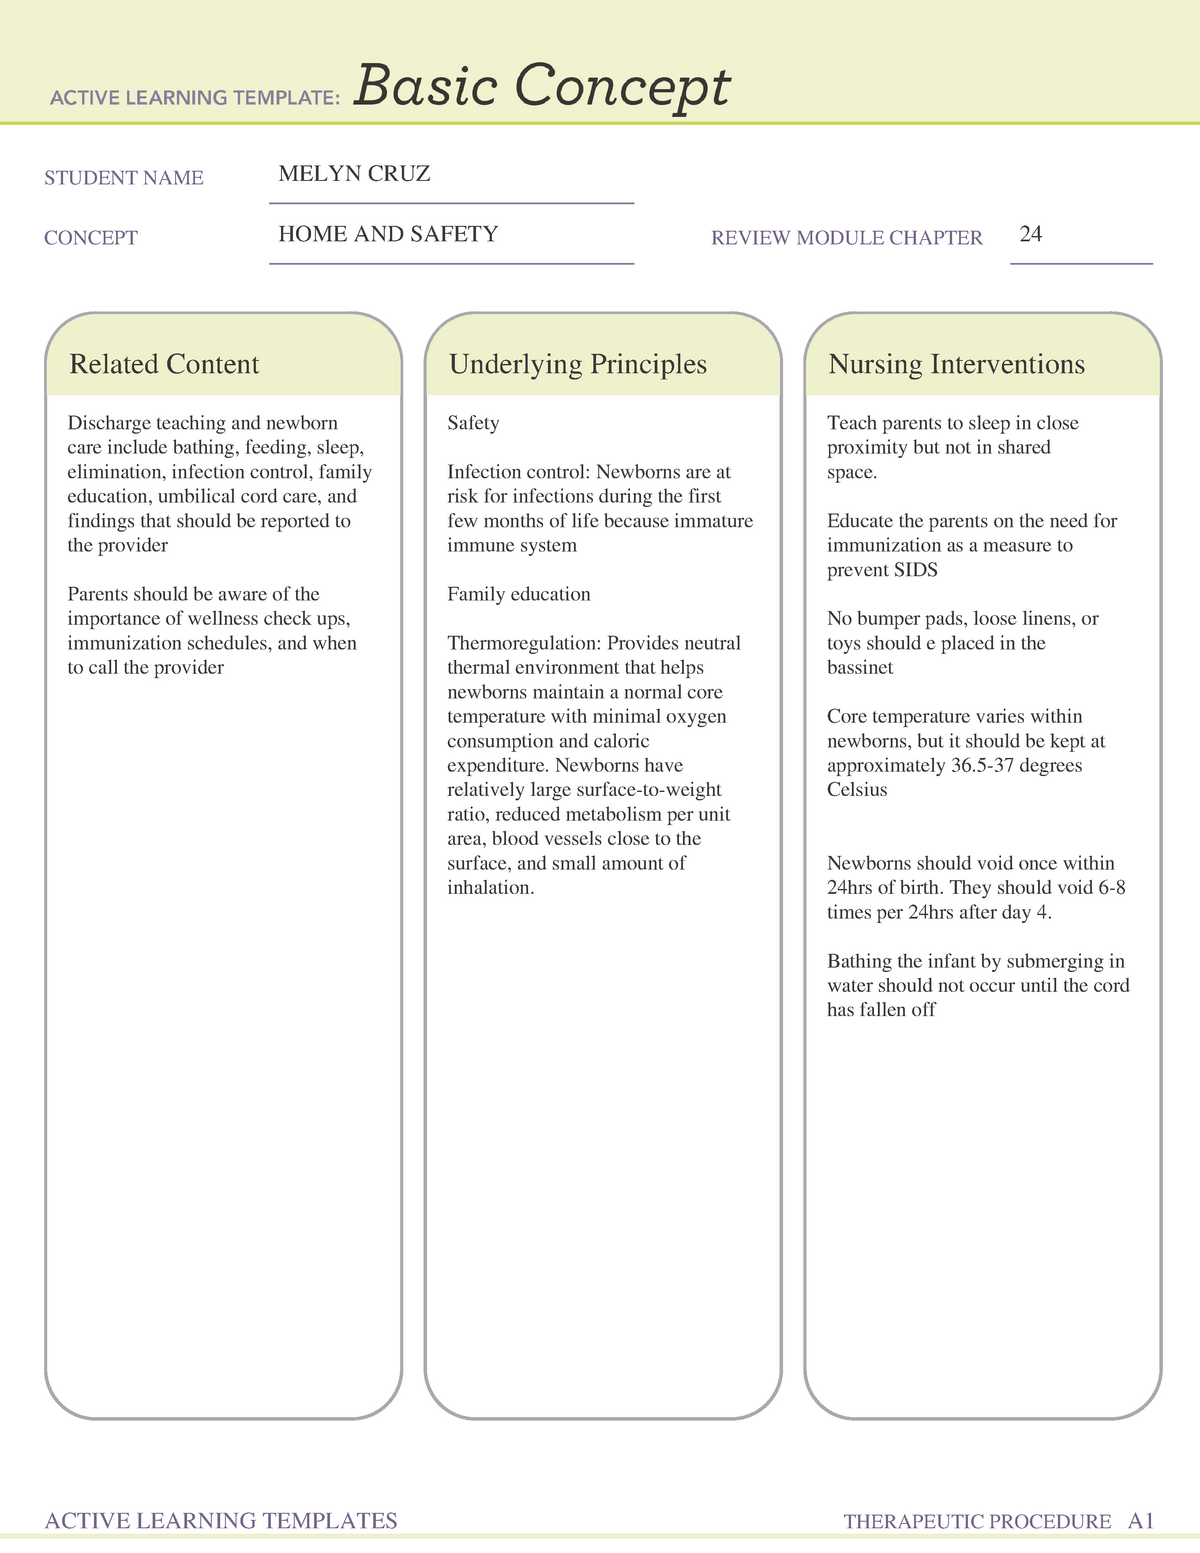 Home and Safety - ATI templates and testing material. - STUDENT NAME